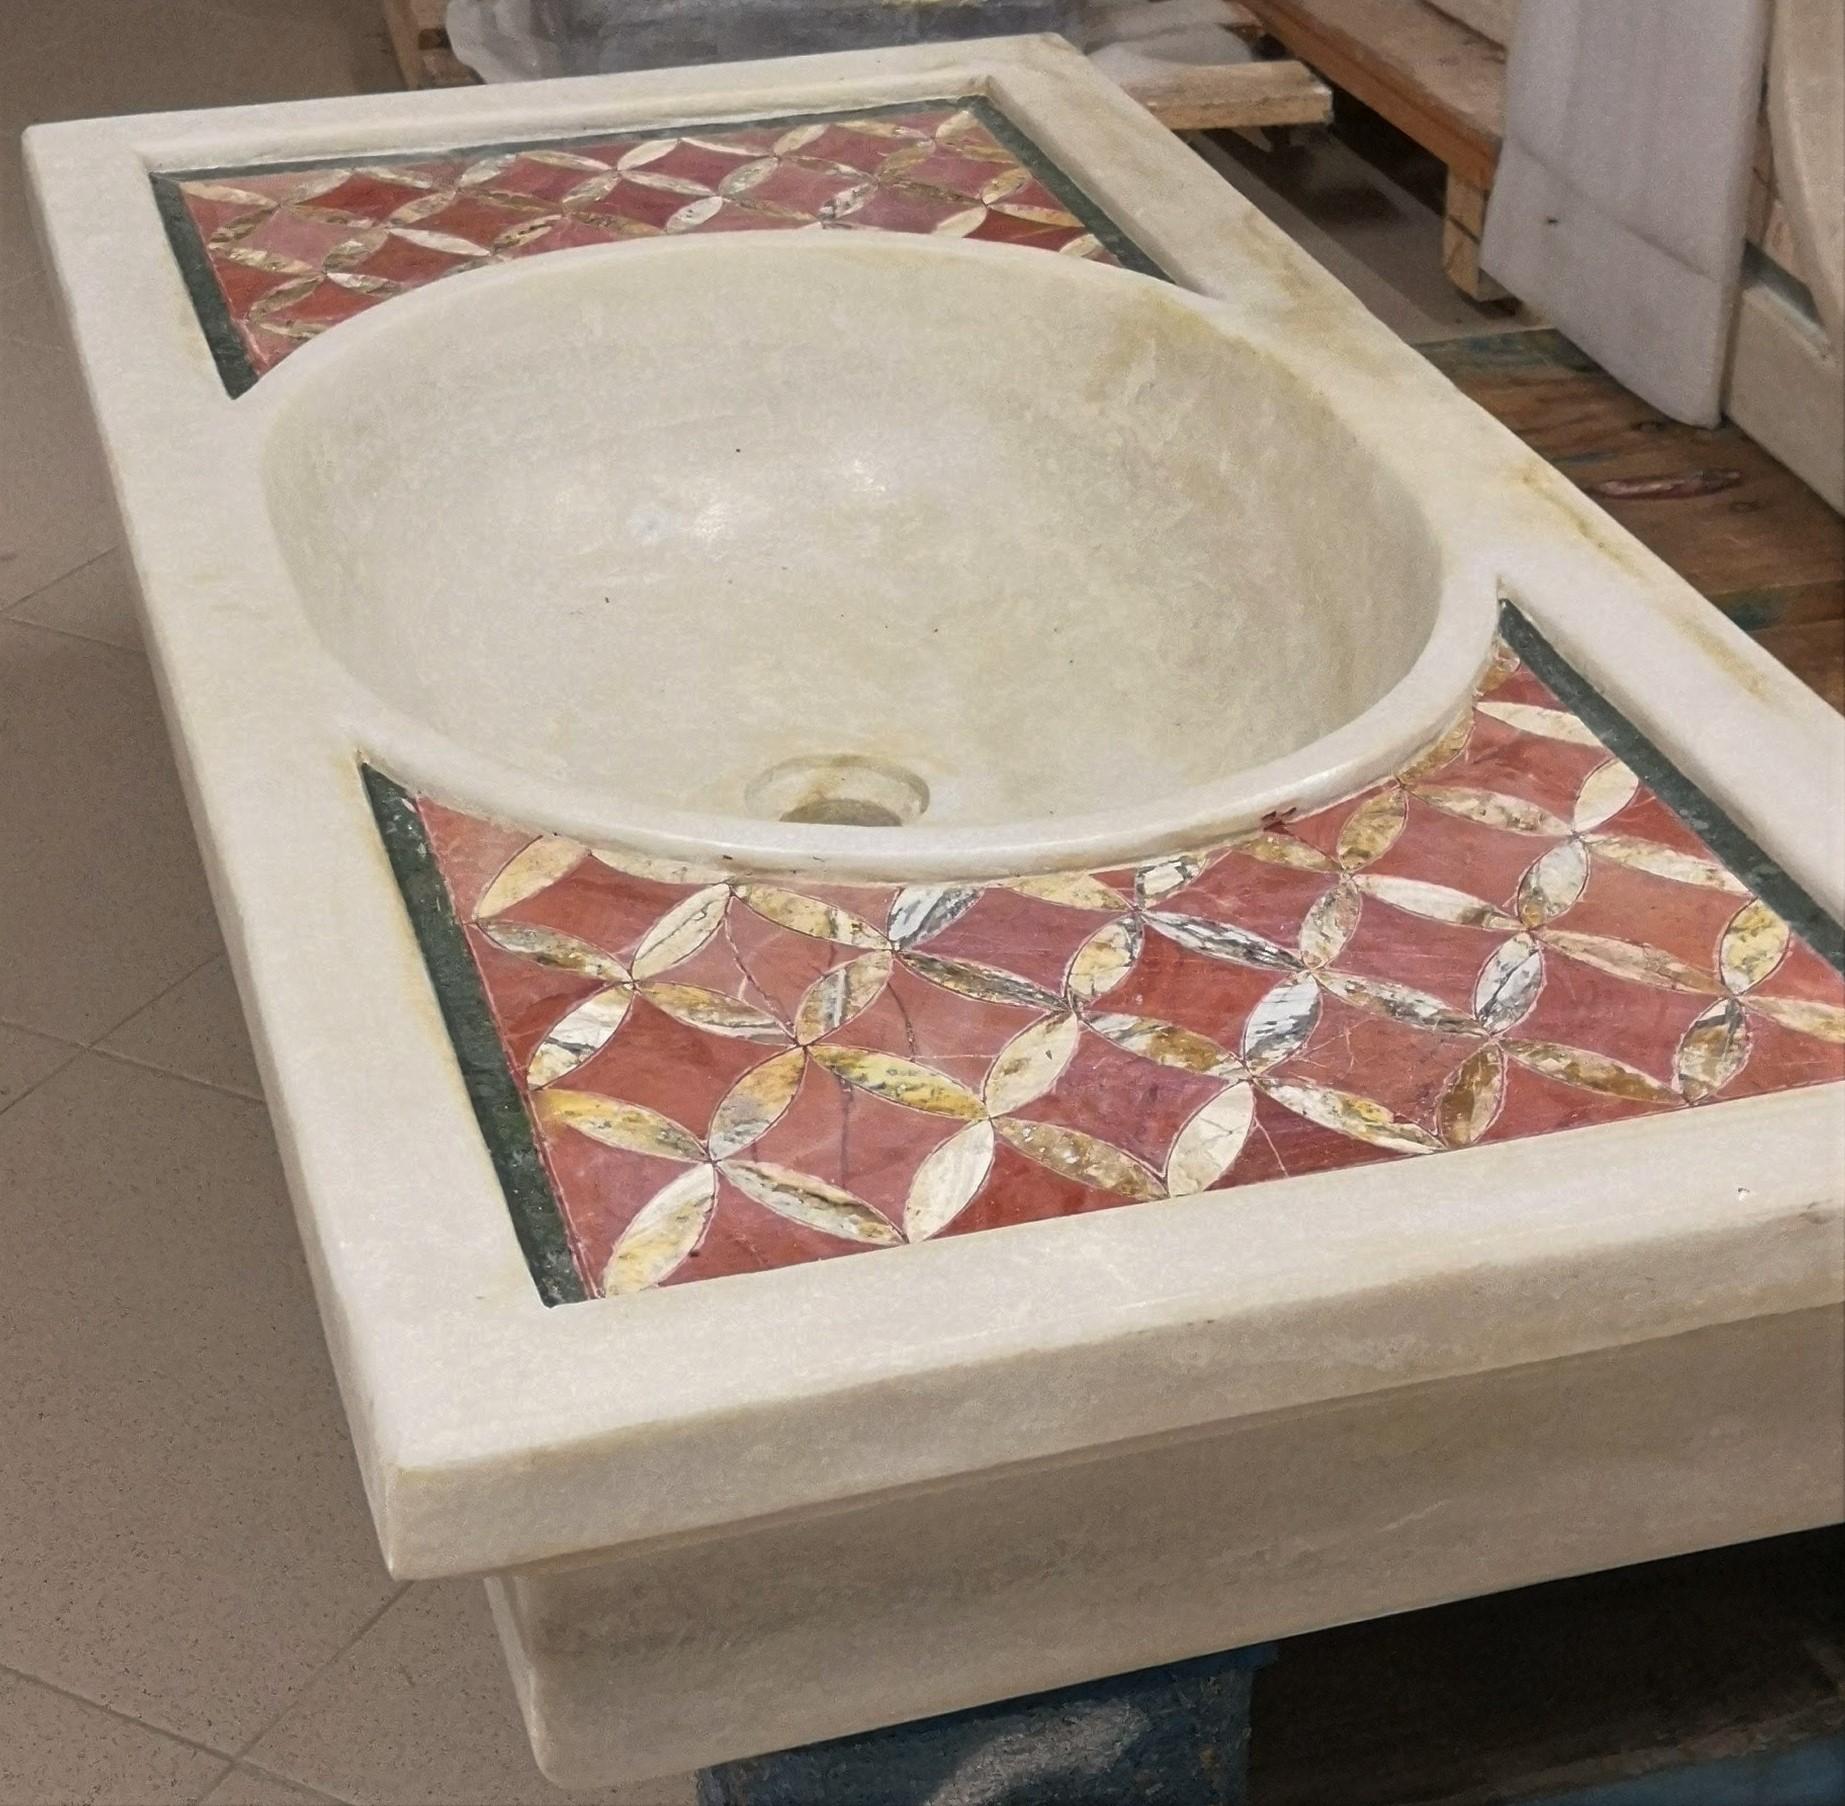 This timeless beautiful Italian classical sink is cut from one single block of white marble with poly chrome inlays, the straight fronted format has fine rhombus inlaid details enclosed
with an ebonised border, the lower sections are traditionally